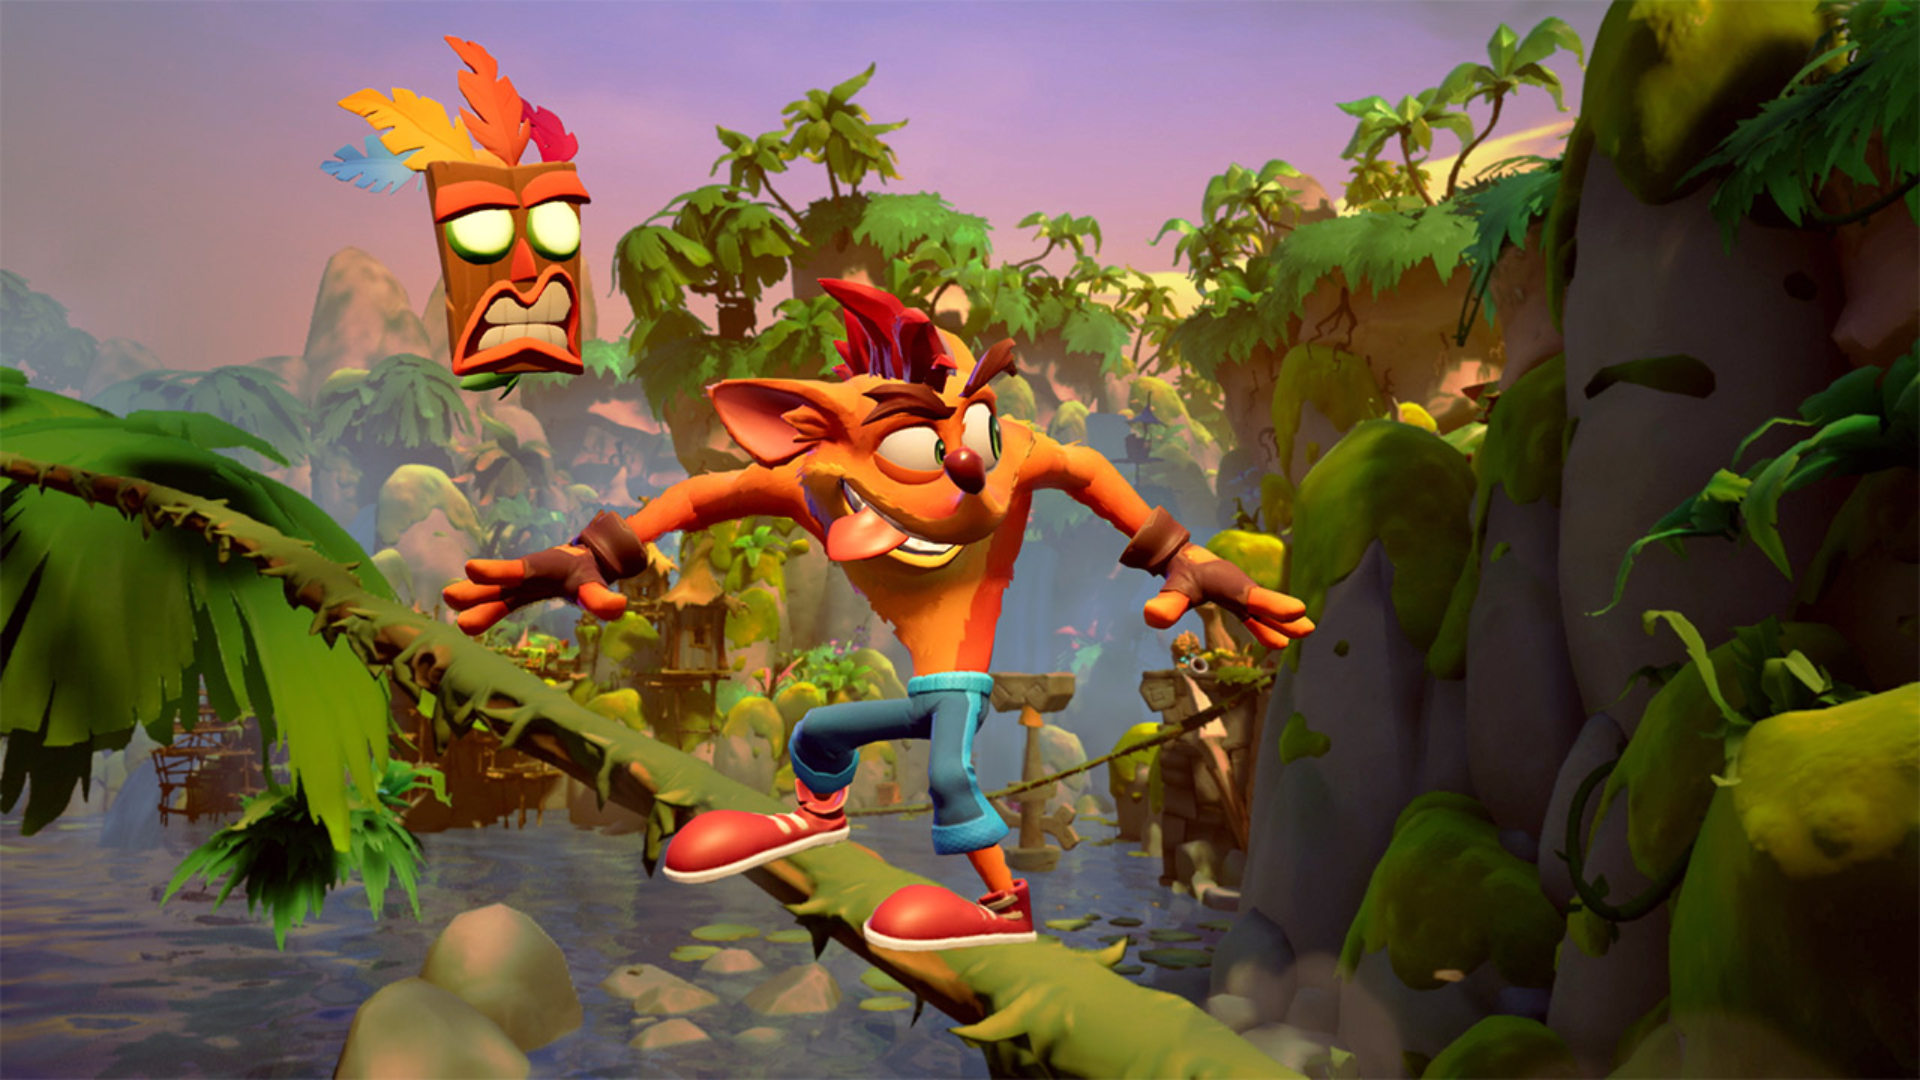 Woah! Here are the best Crash Bandicoot games on Switch and mobile